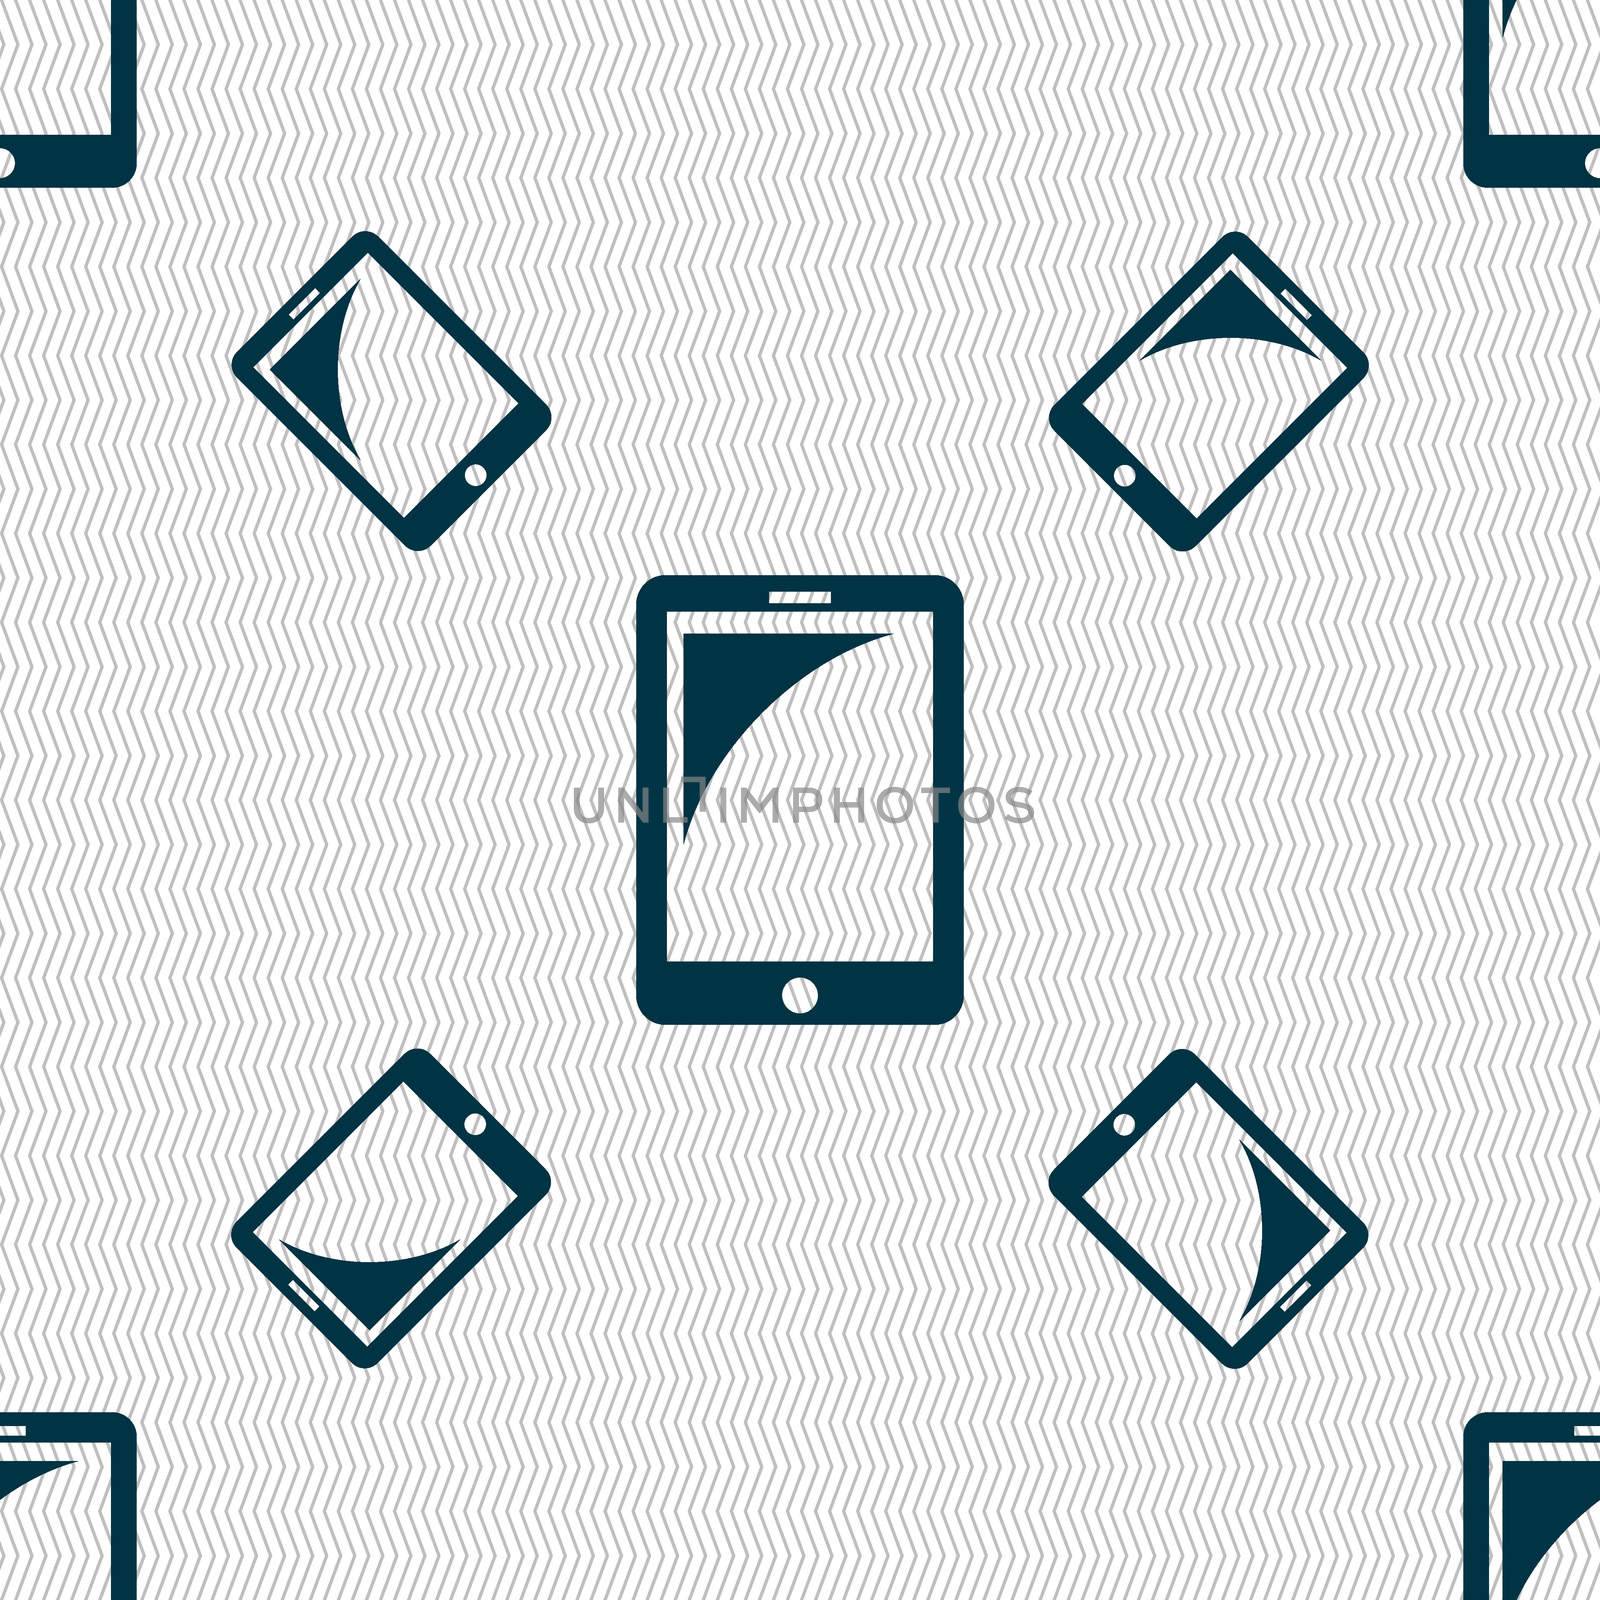 Tablet sign icon. smartphone button. Seamless pattern with geometric texture. illustration